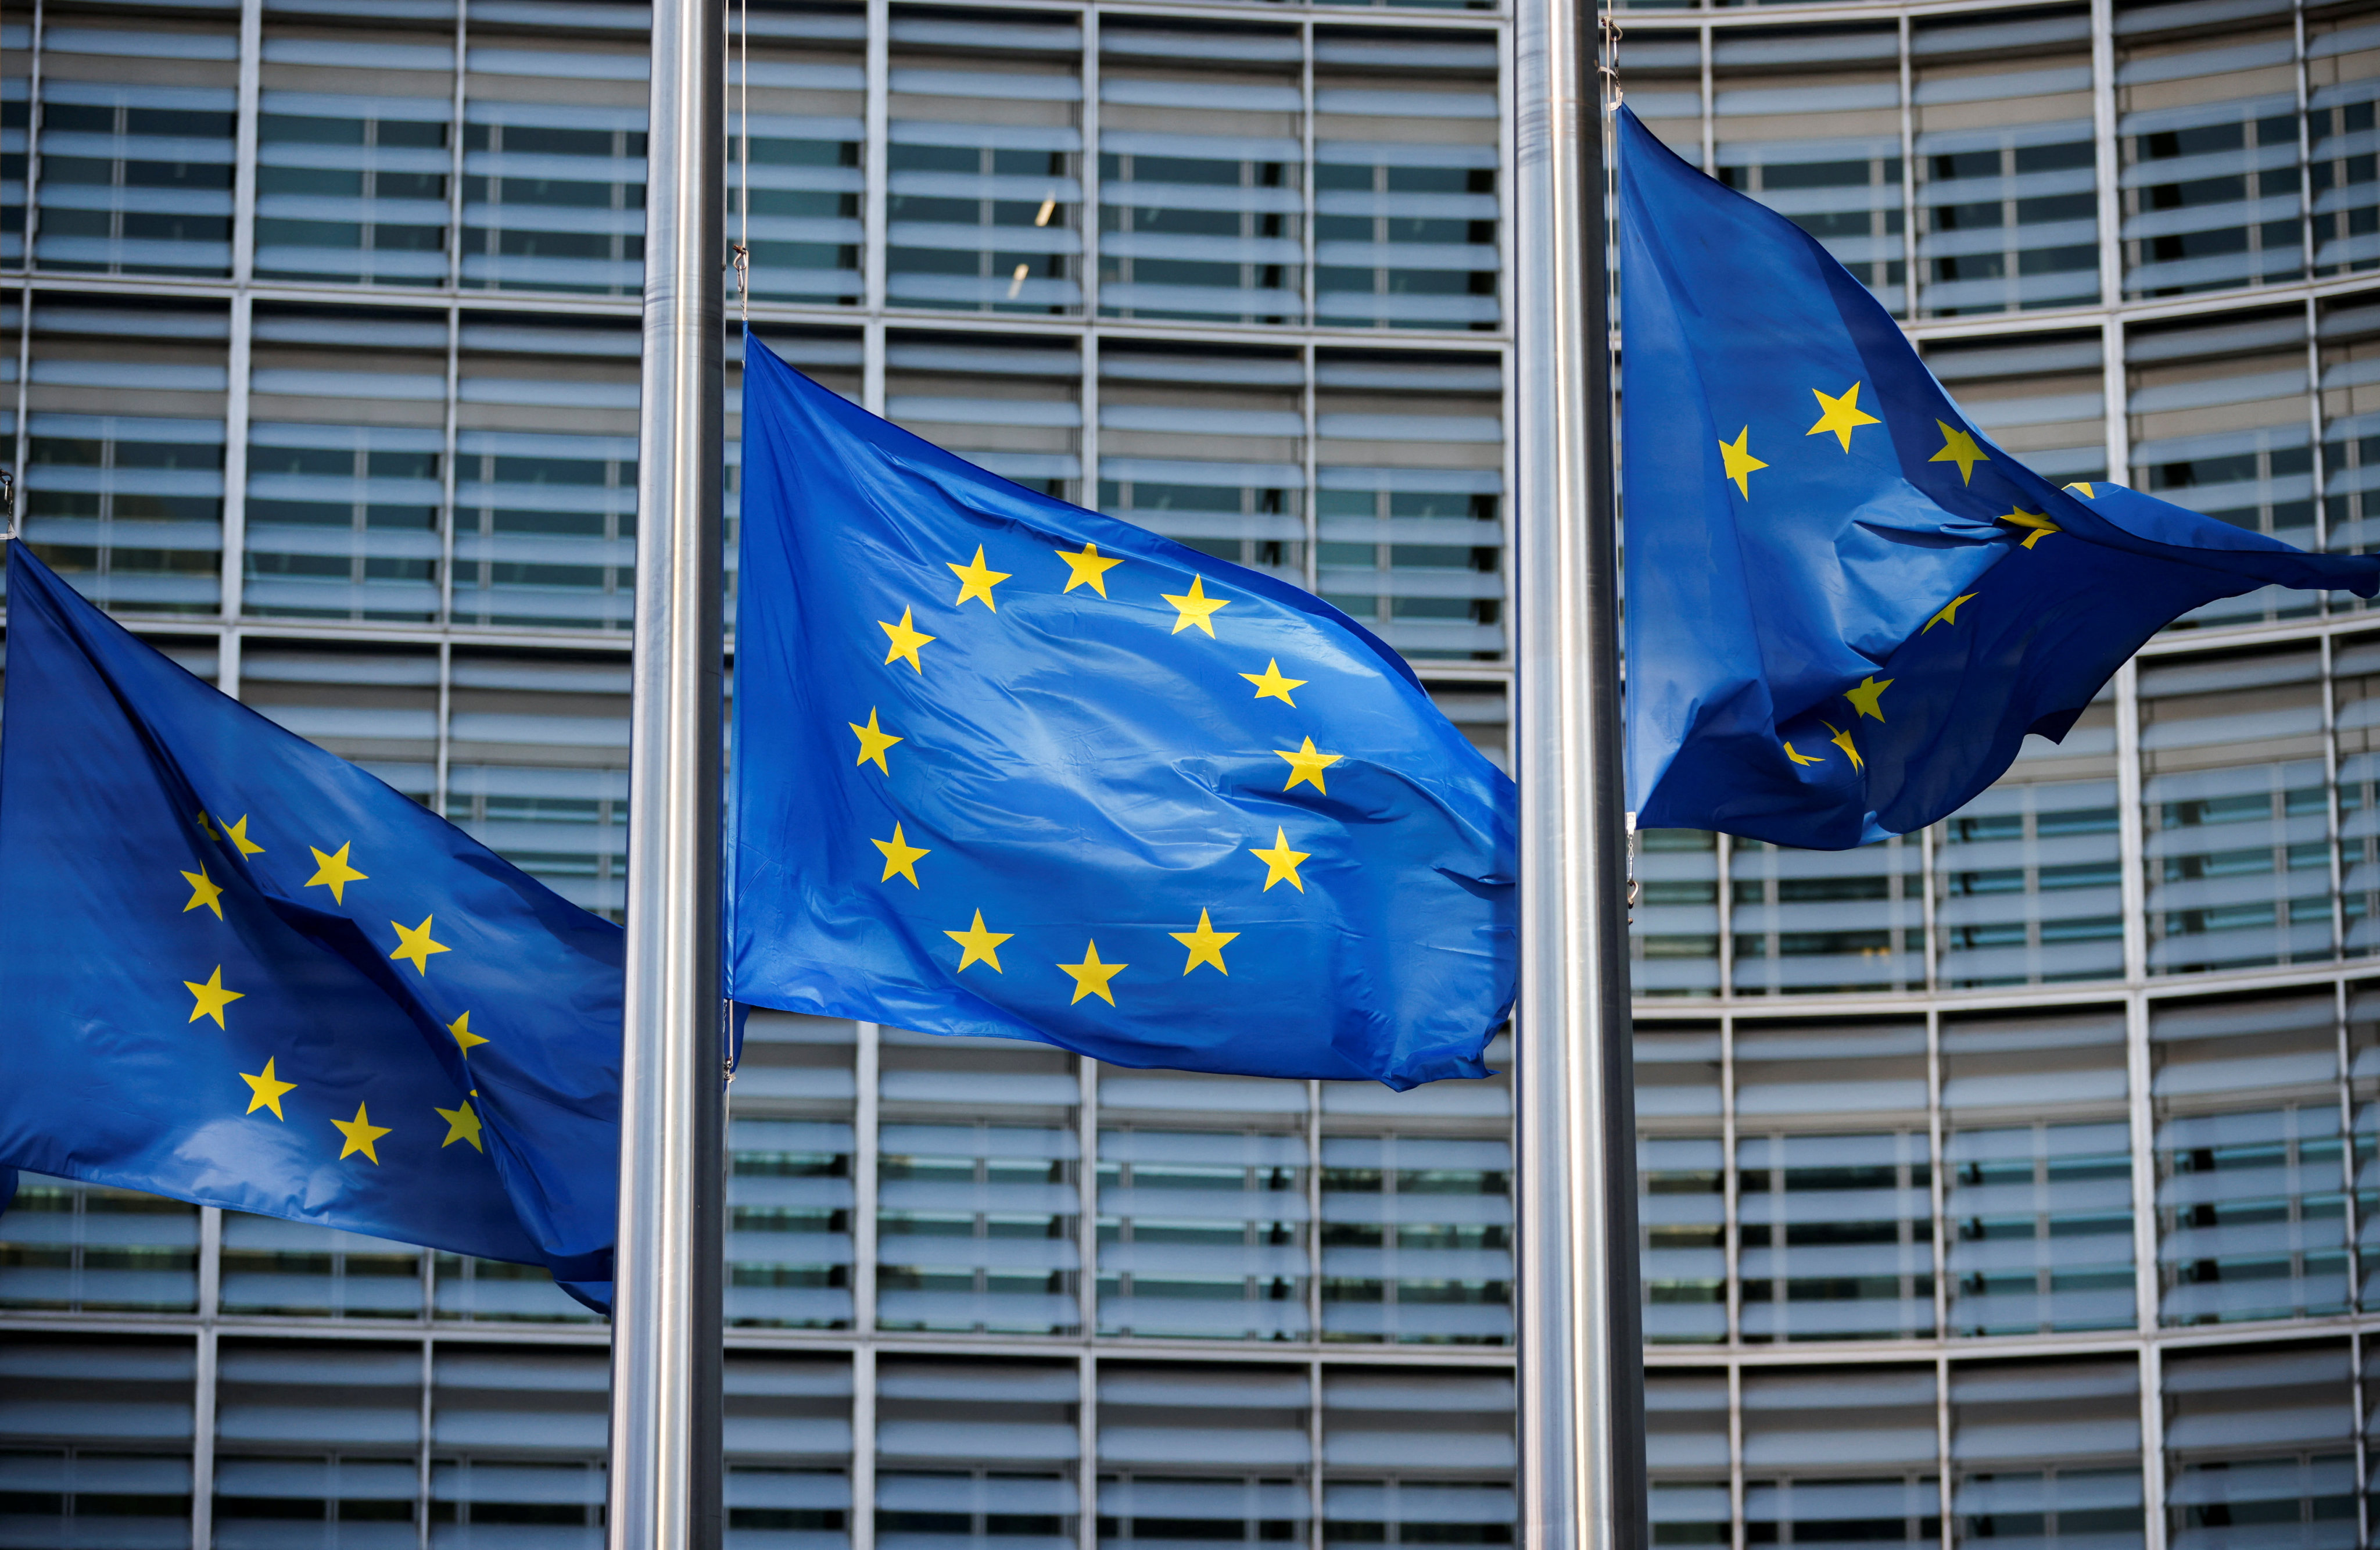 China has repeatedly warned the European Union against sanctioning its companies and has said it will retaliate. Photo: Reuters